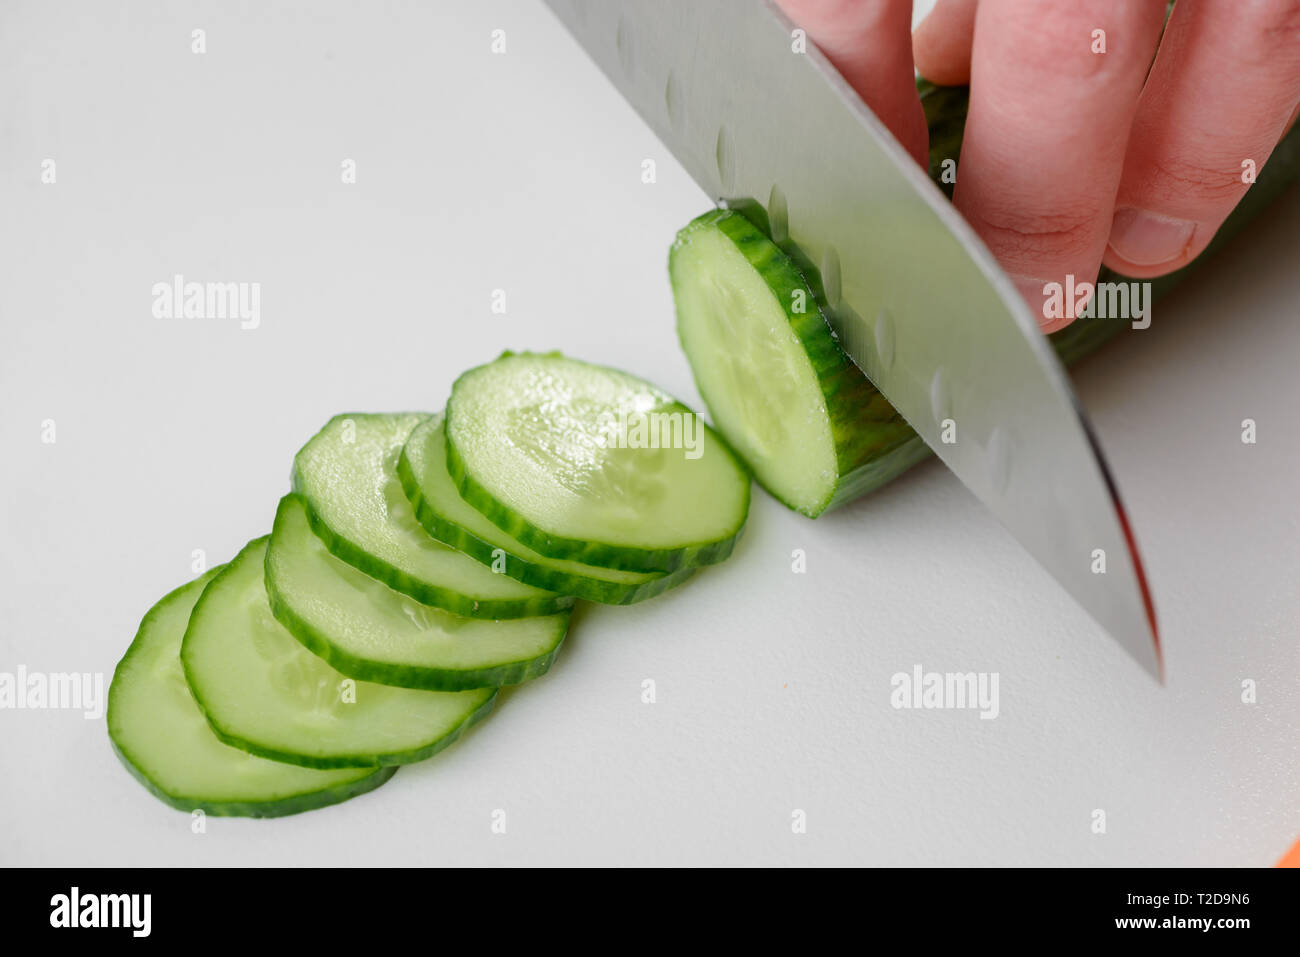 https://c8.alamy.com/comp/T2D9N6/man-cutting-a-cucumber-with-a-chefs-knife-thin-slices-of-the-vegetable-on-a-white-board-T2D9N6.jpg